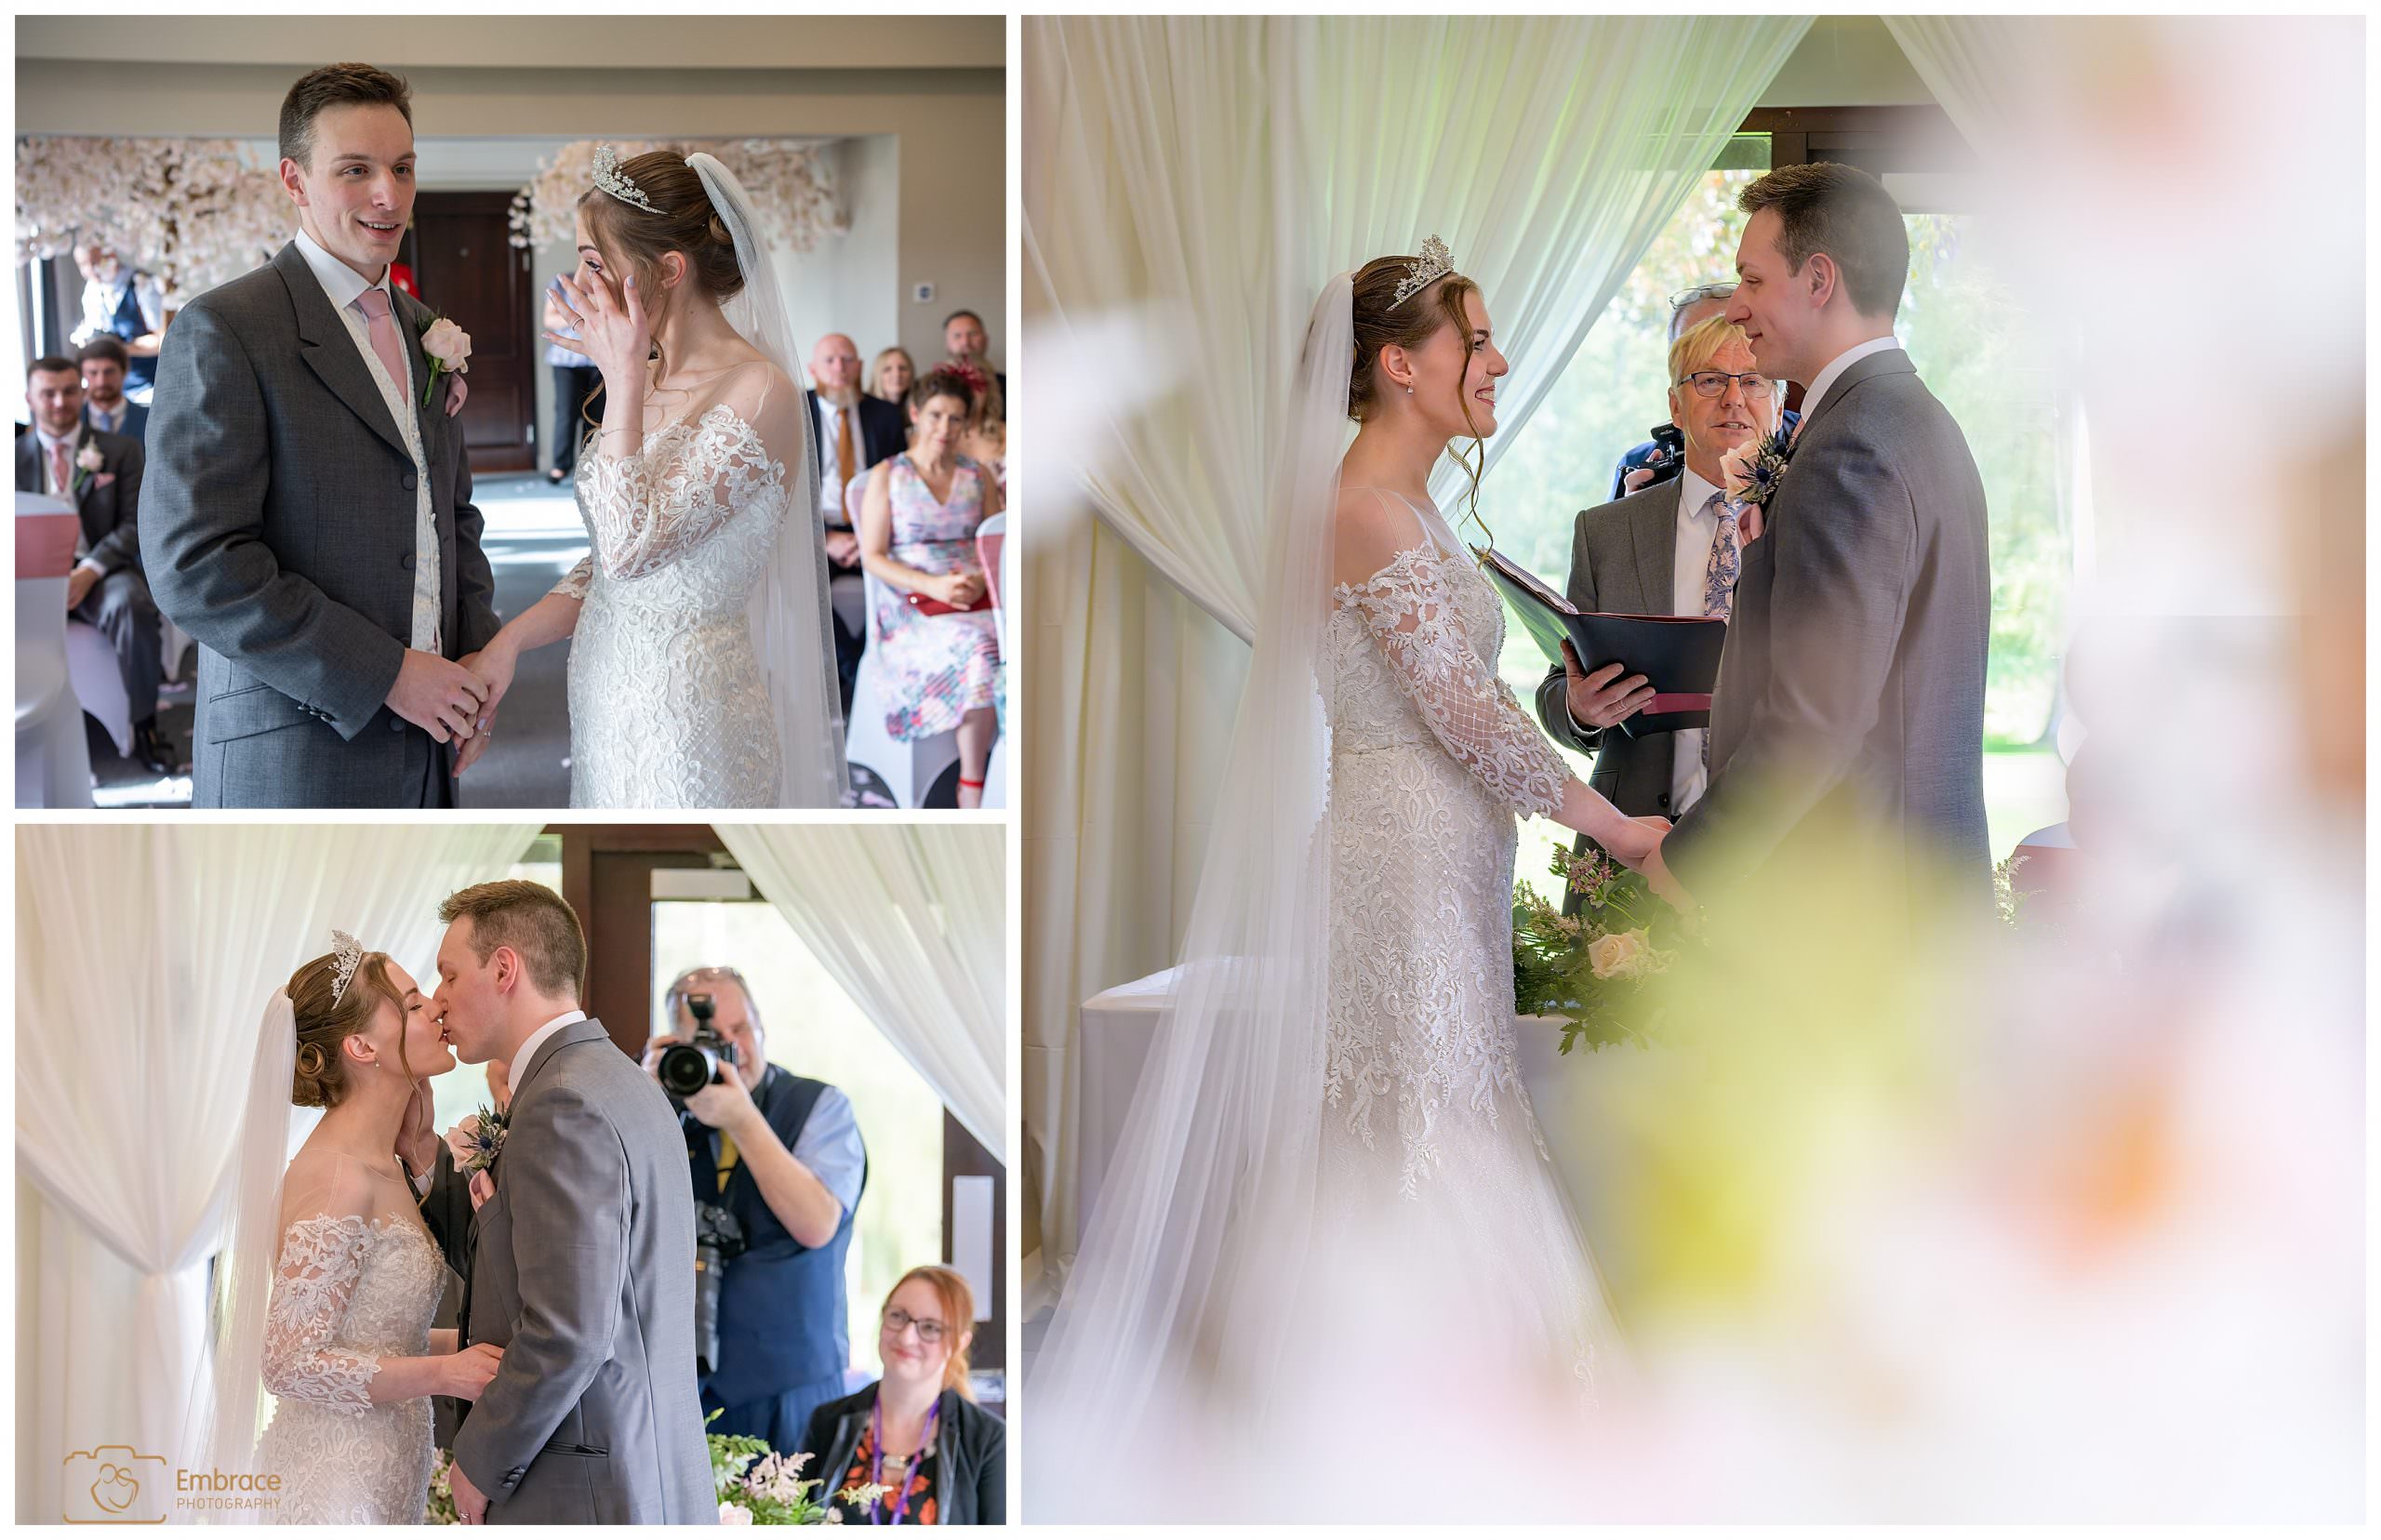 Emotional bride photographed by Embrace Photography at Barnham Broom ceremony room